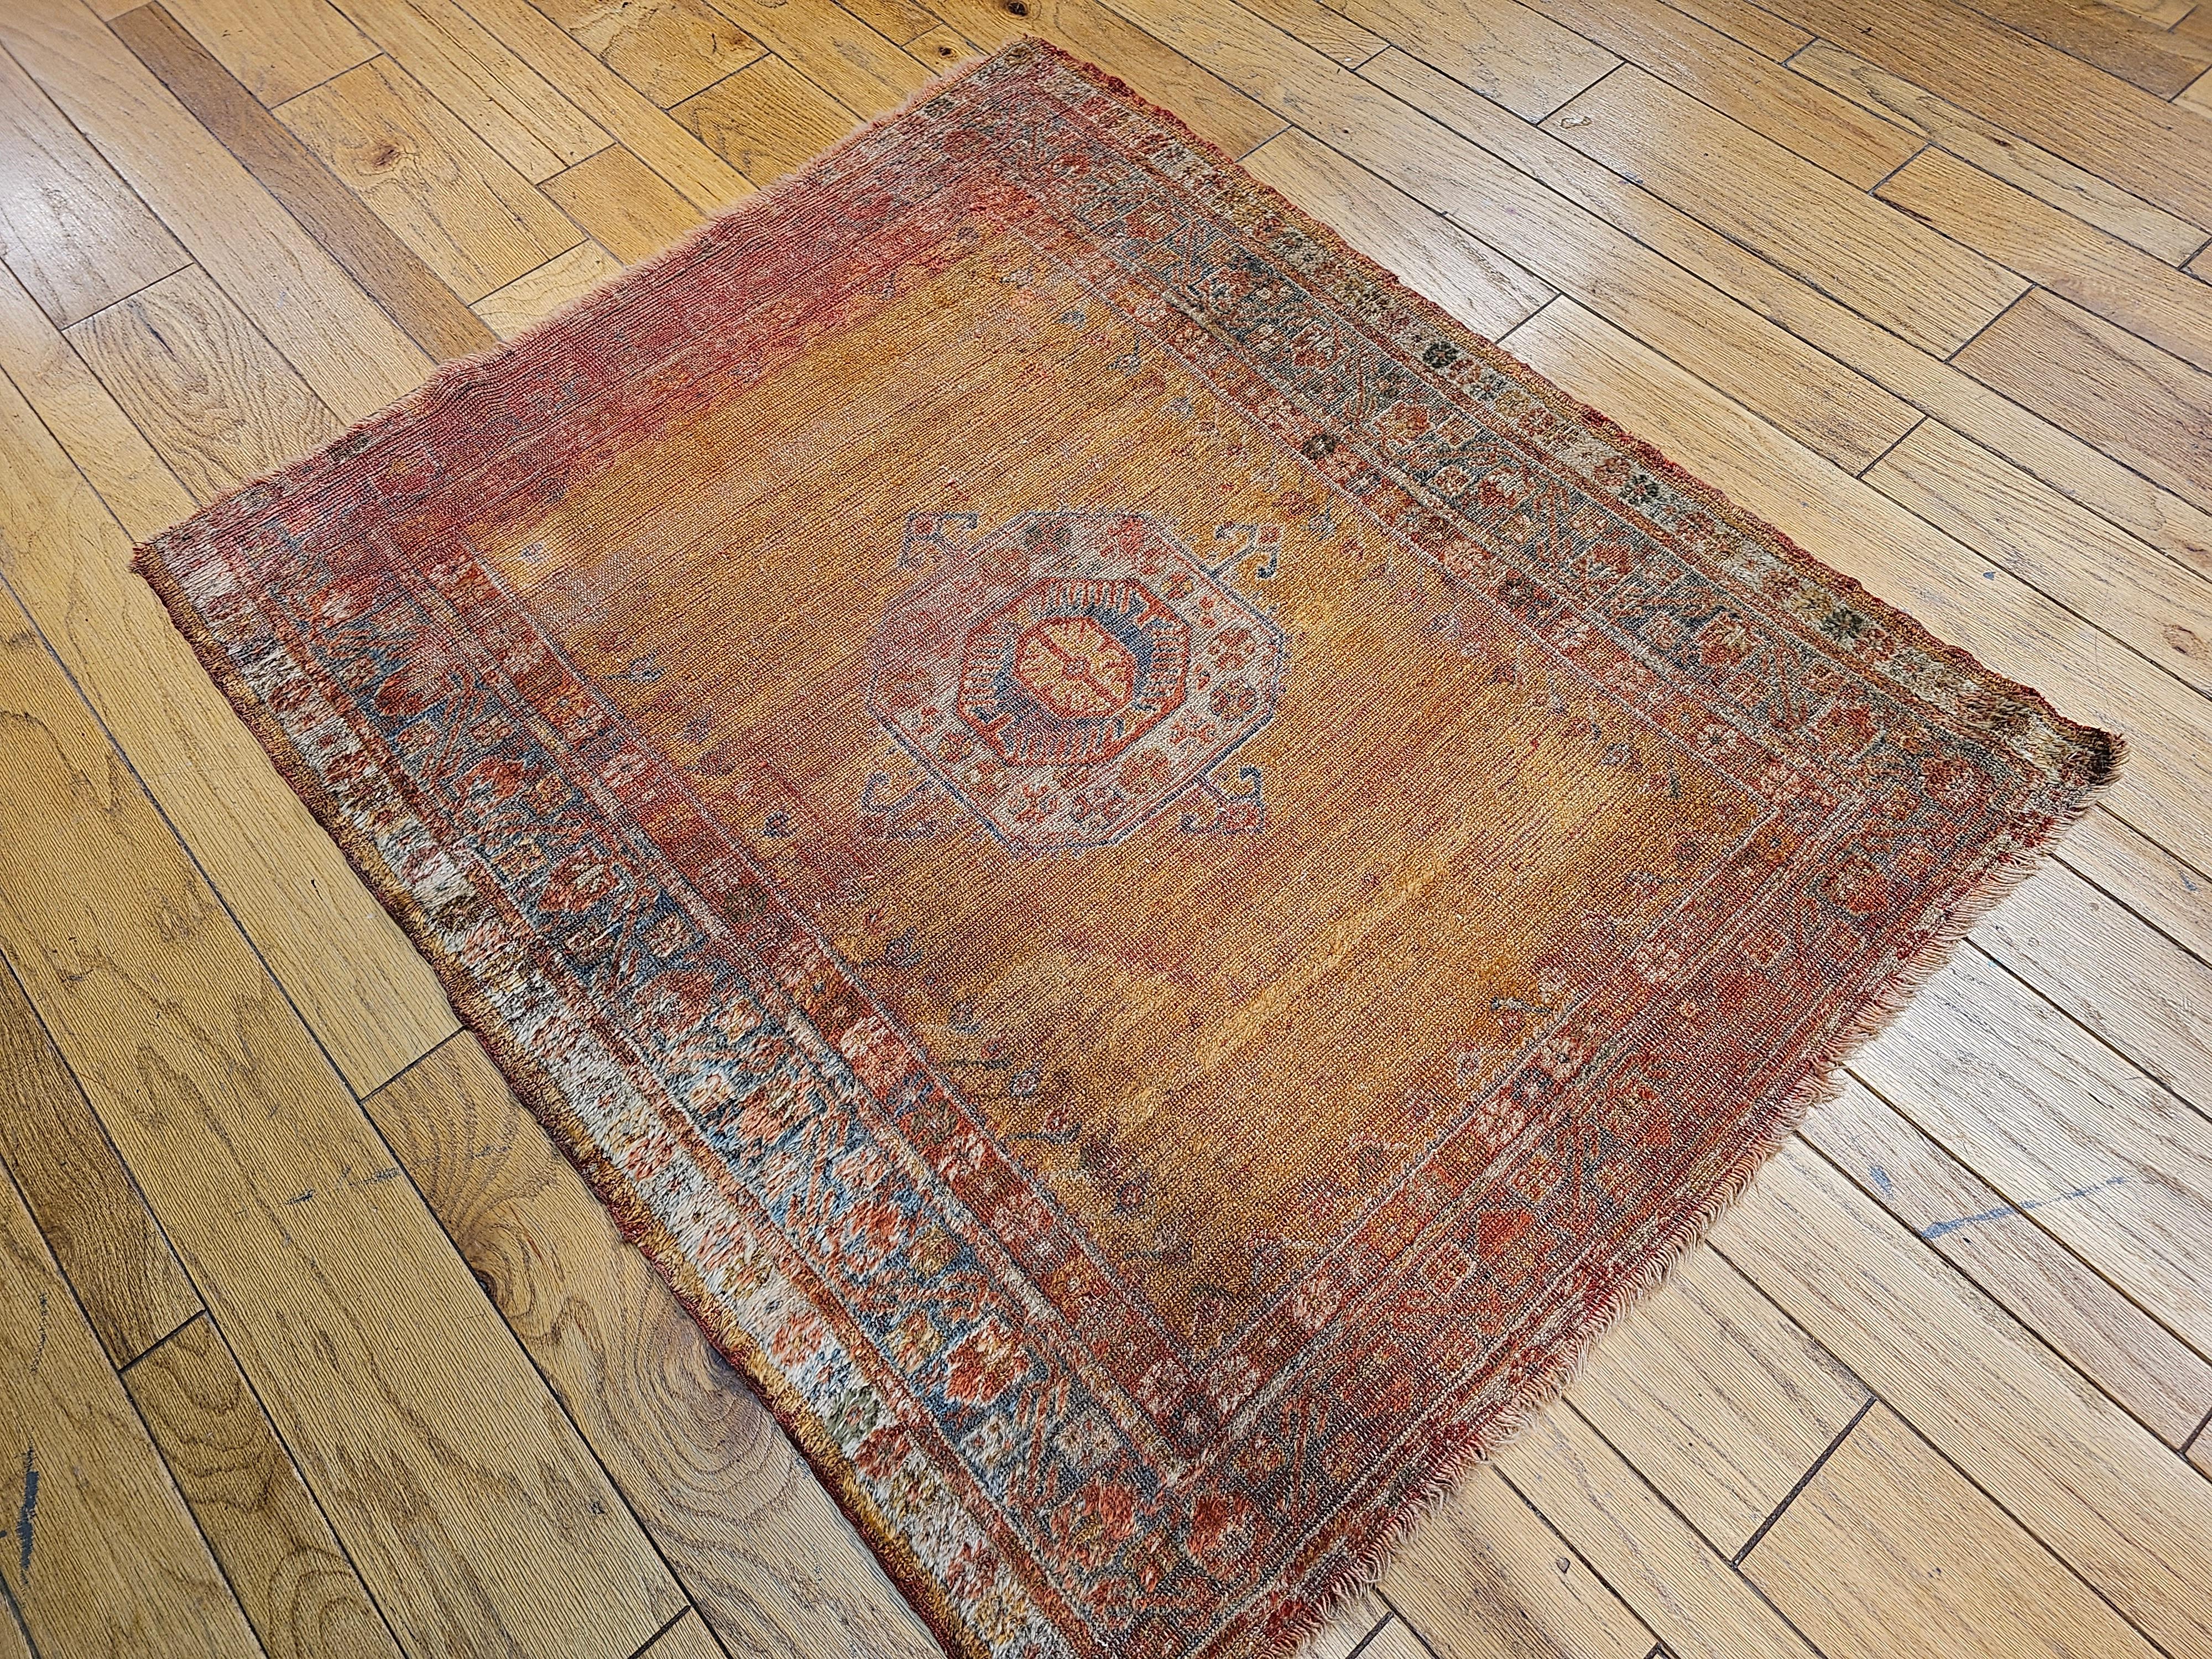 Late 19th Century Turkish Oushak Area Rug in Mamluk Pattern in Saffron, Teal For Sale 6